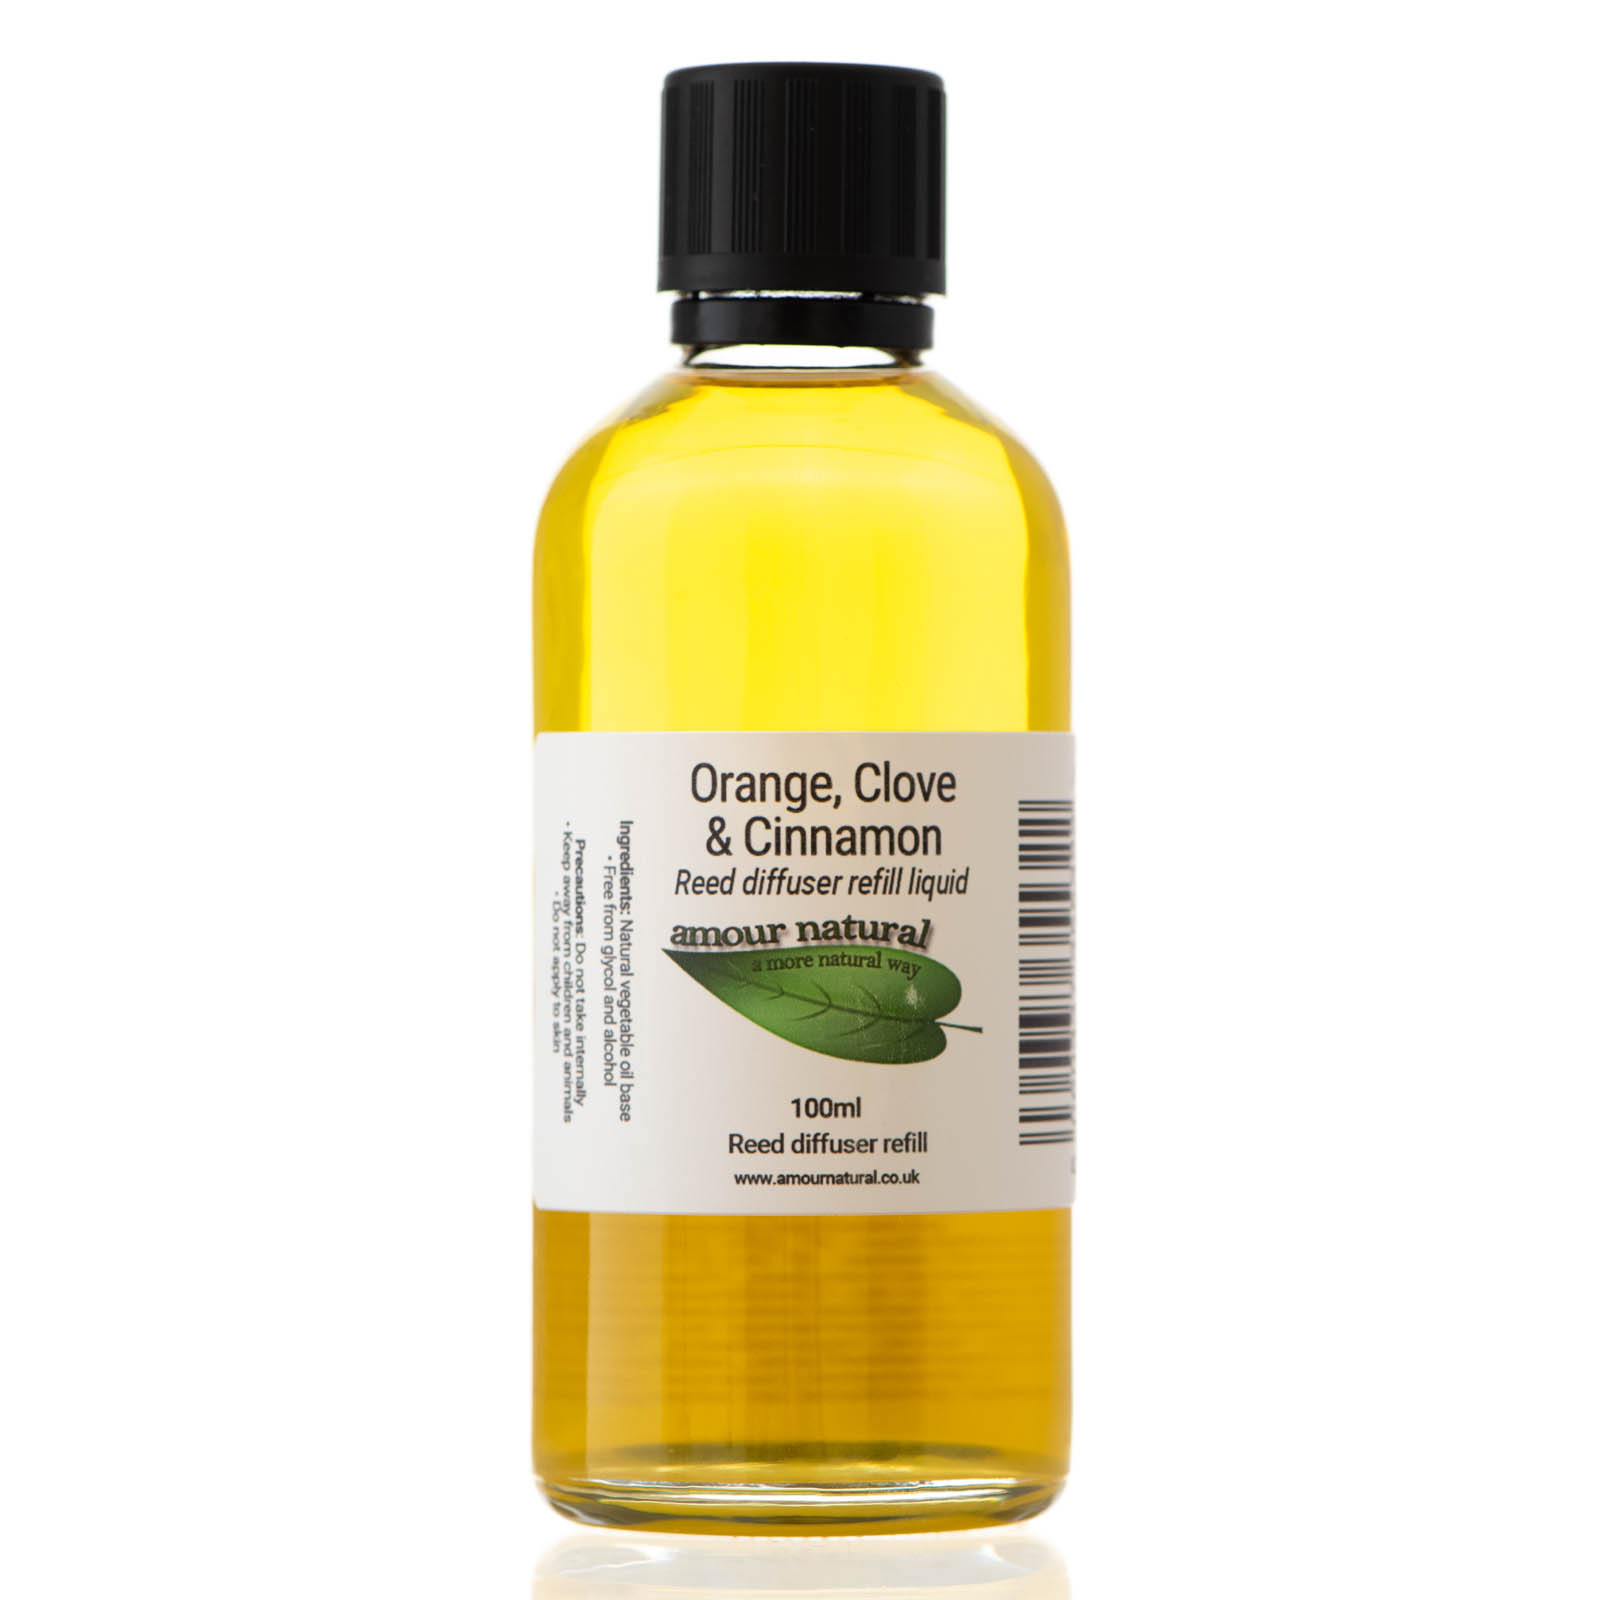 Orange, Clove and Cinnamon reed diffuser refill (bottle only)